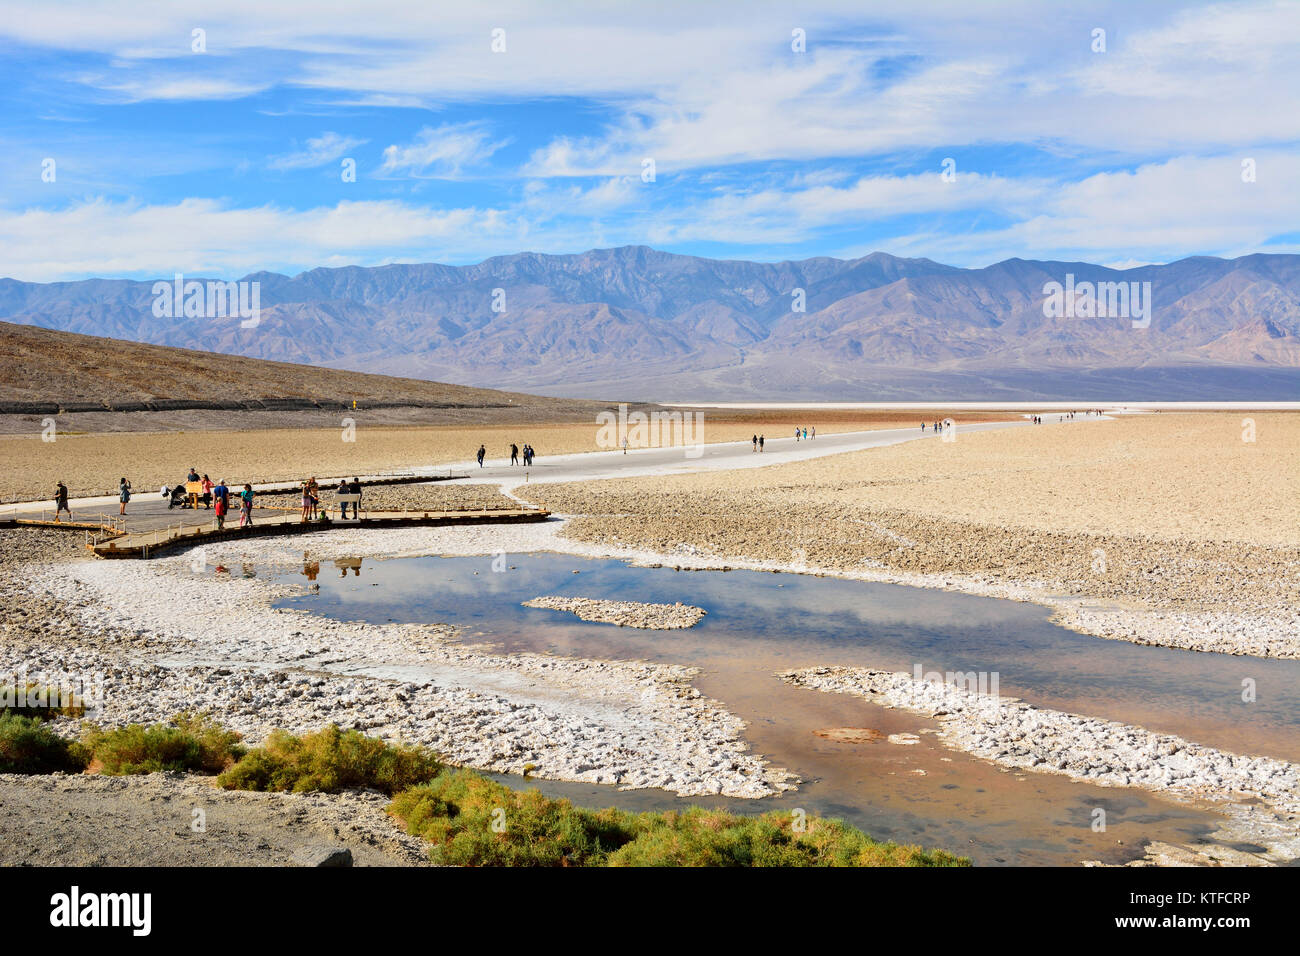 Death Valley National Park, California, USA - November 23, 2017. View of Badwater Basin, at elevation of 85.5 meters below sea level, in the Death Val Stock Photo